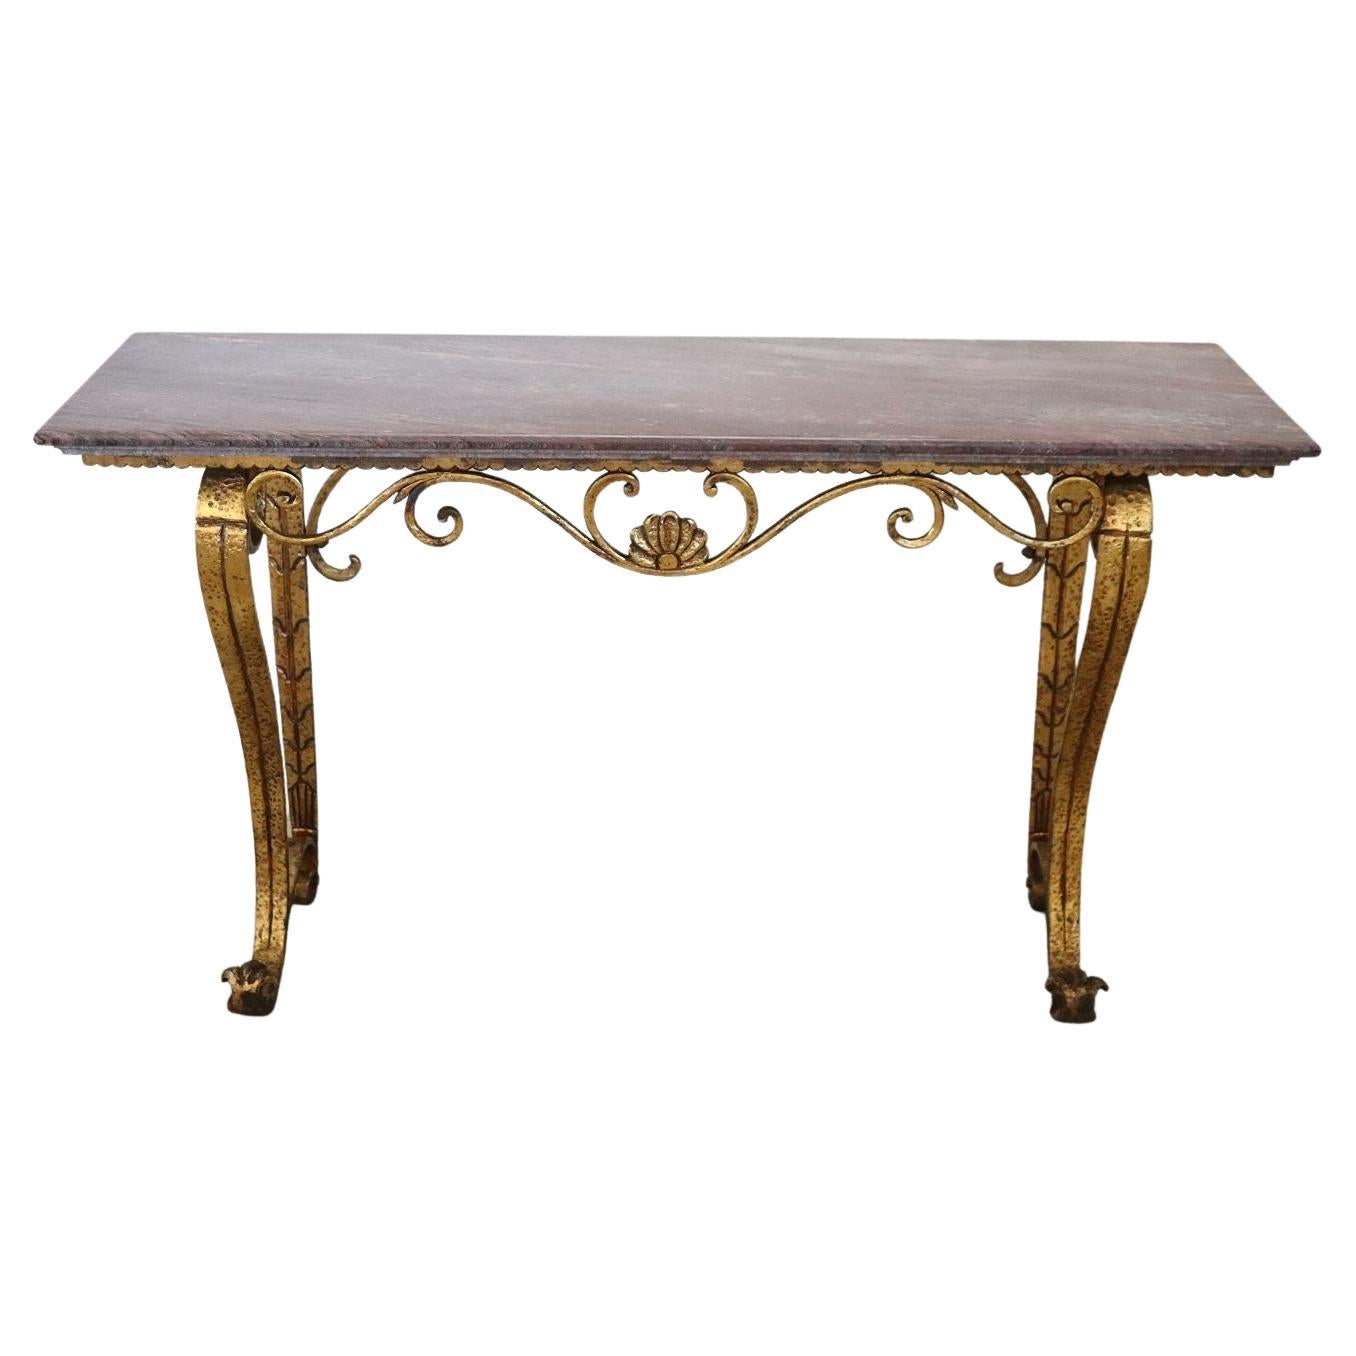 20th Century Italian Gilded Iron and Marble Top Console Table